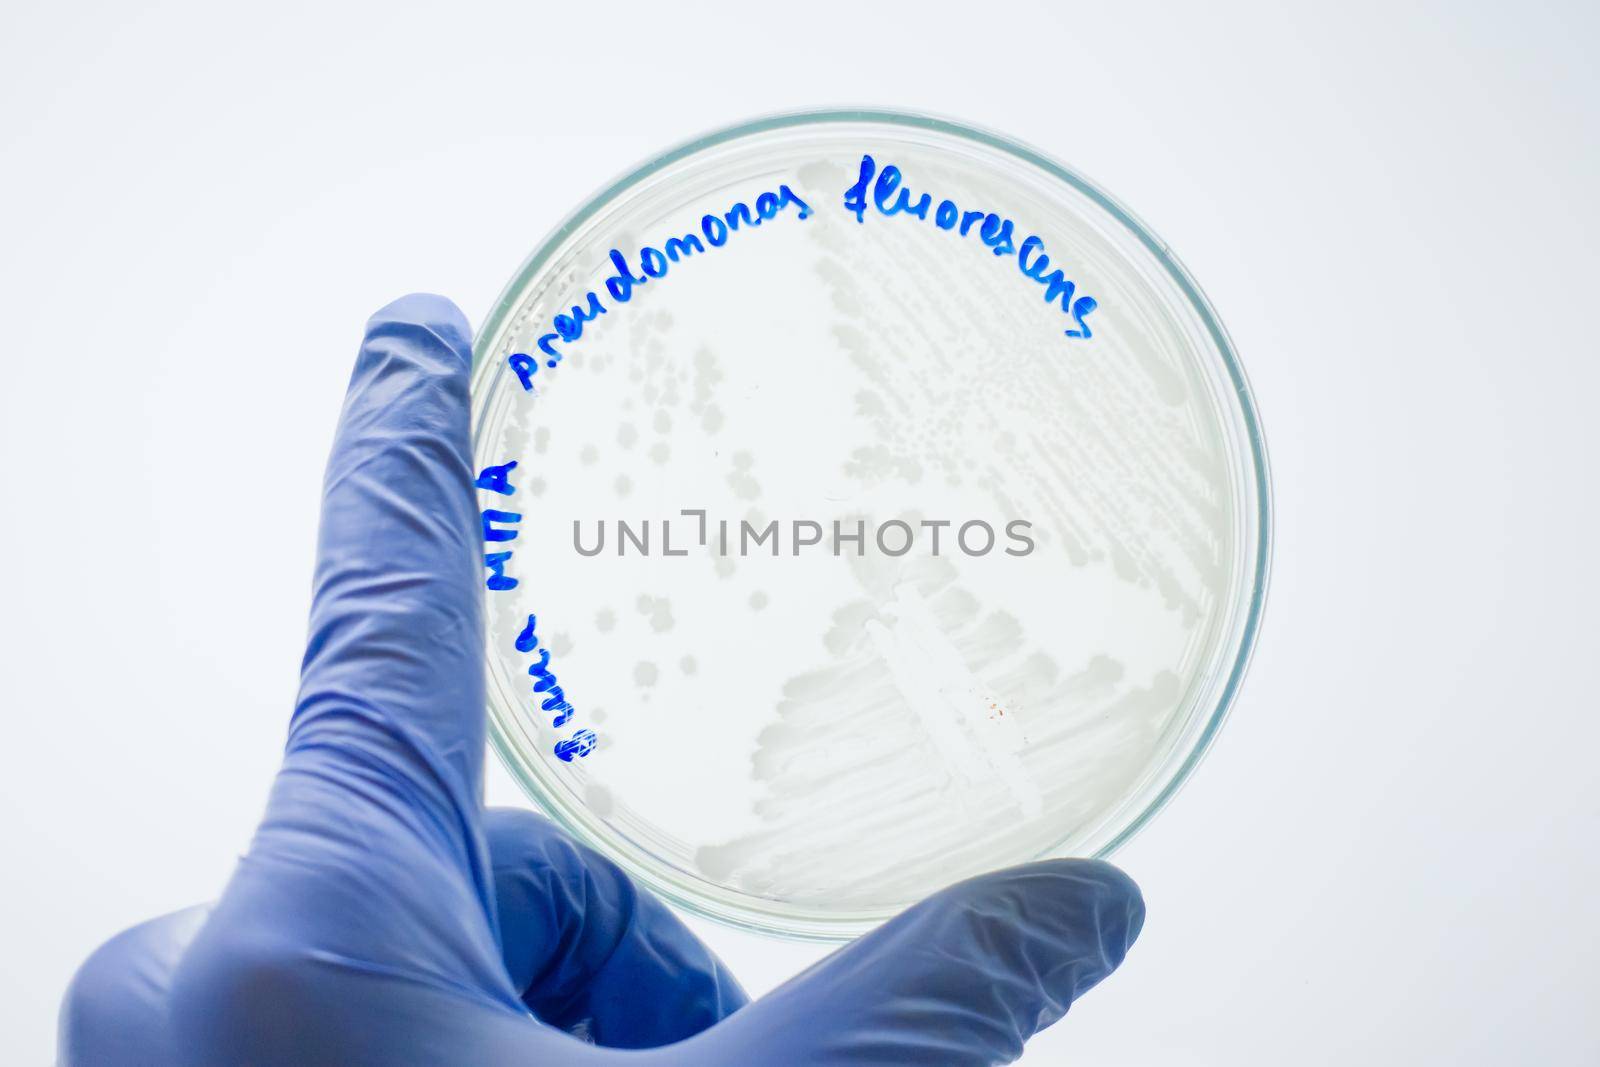 A scientist holding a petri dish in front of him. by Jannetta